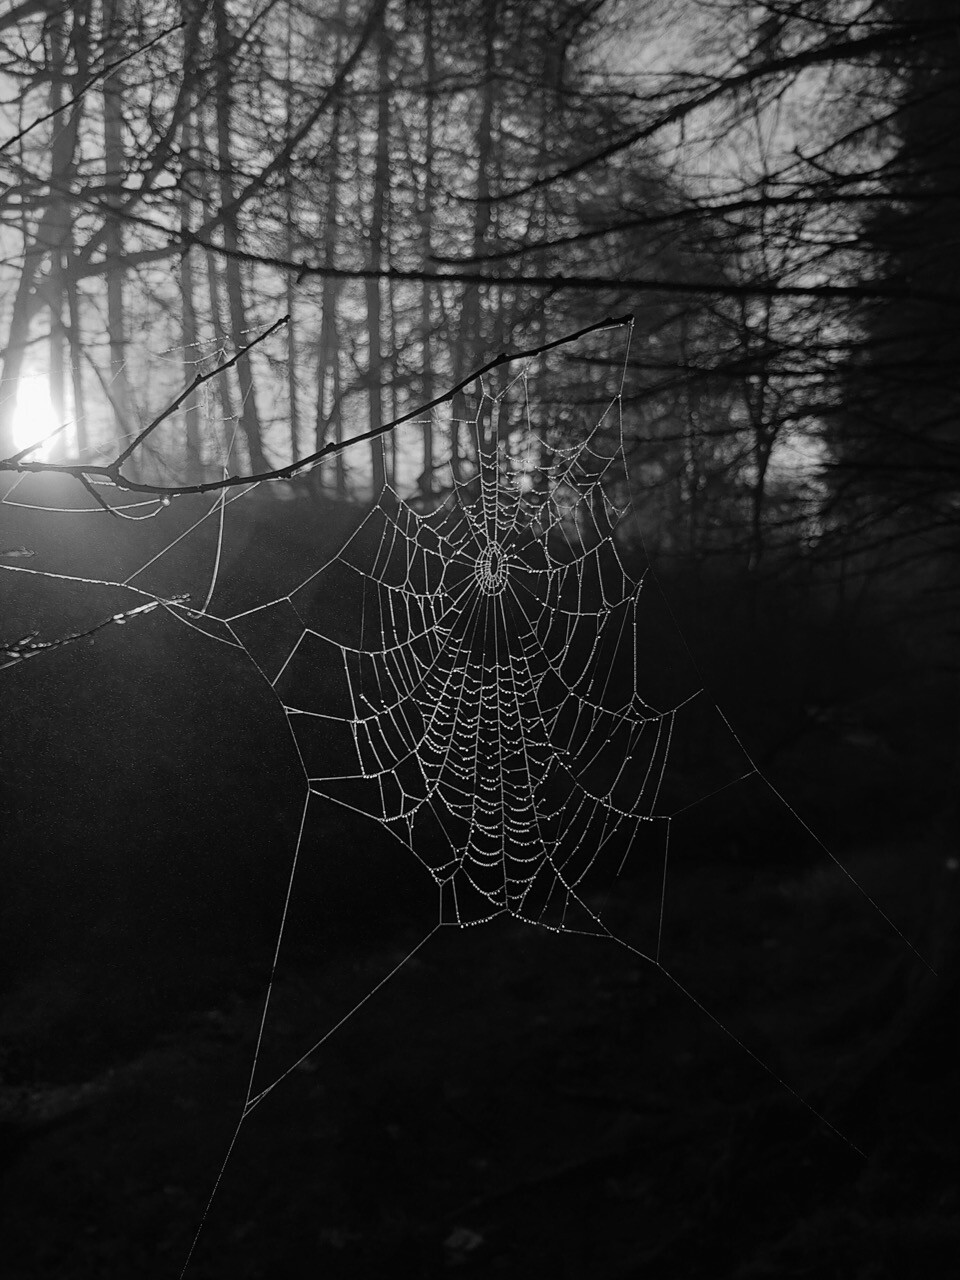 Black and white portrait format image showing early morning sunlight penetrating the tall, straight trunks of Scots pine trees and highlighting the delicate, dew-laden structure of a large spider's web which is clinging to slender branches